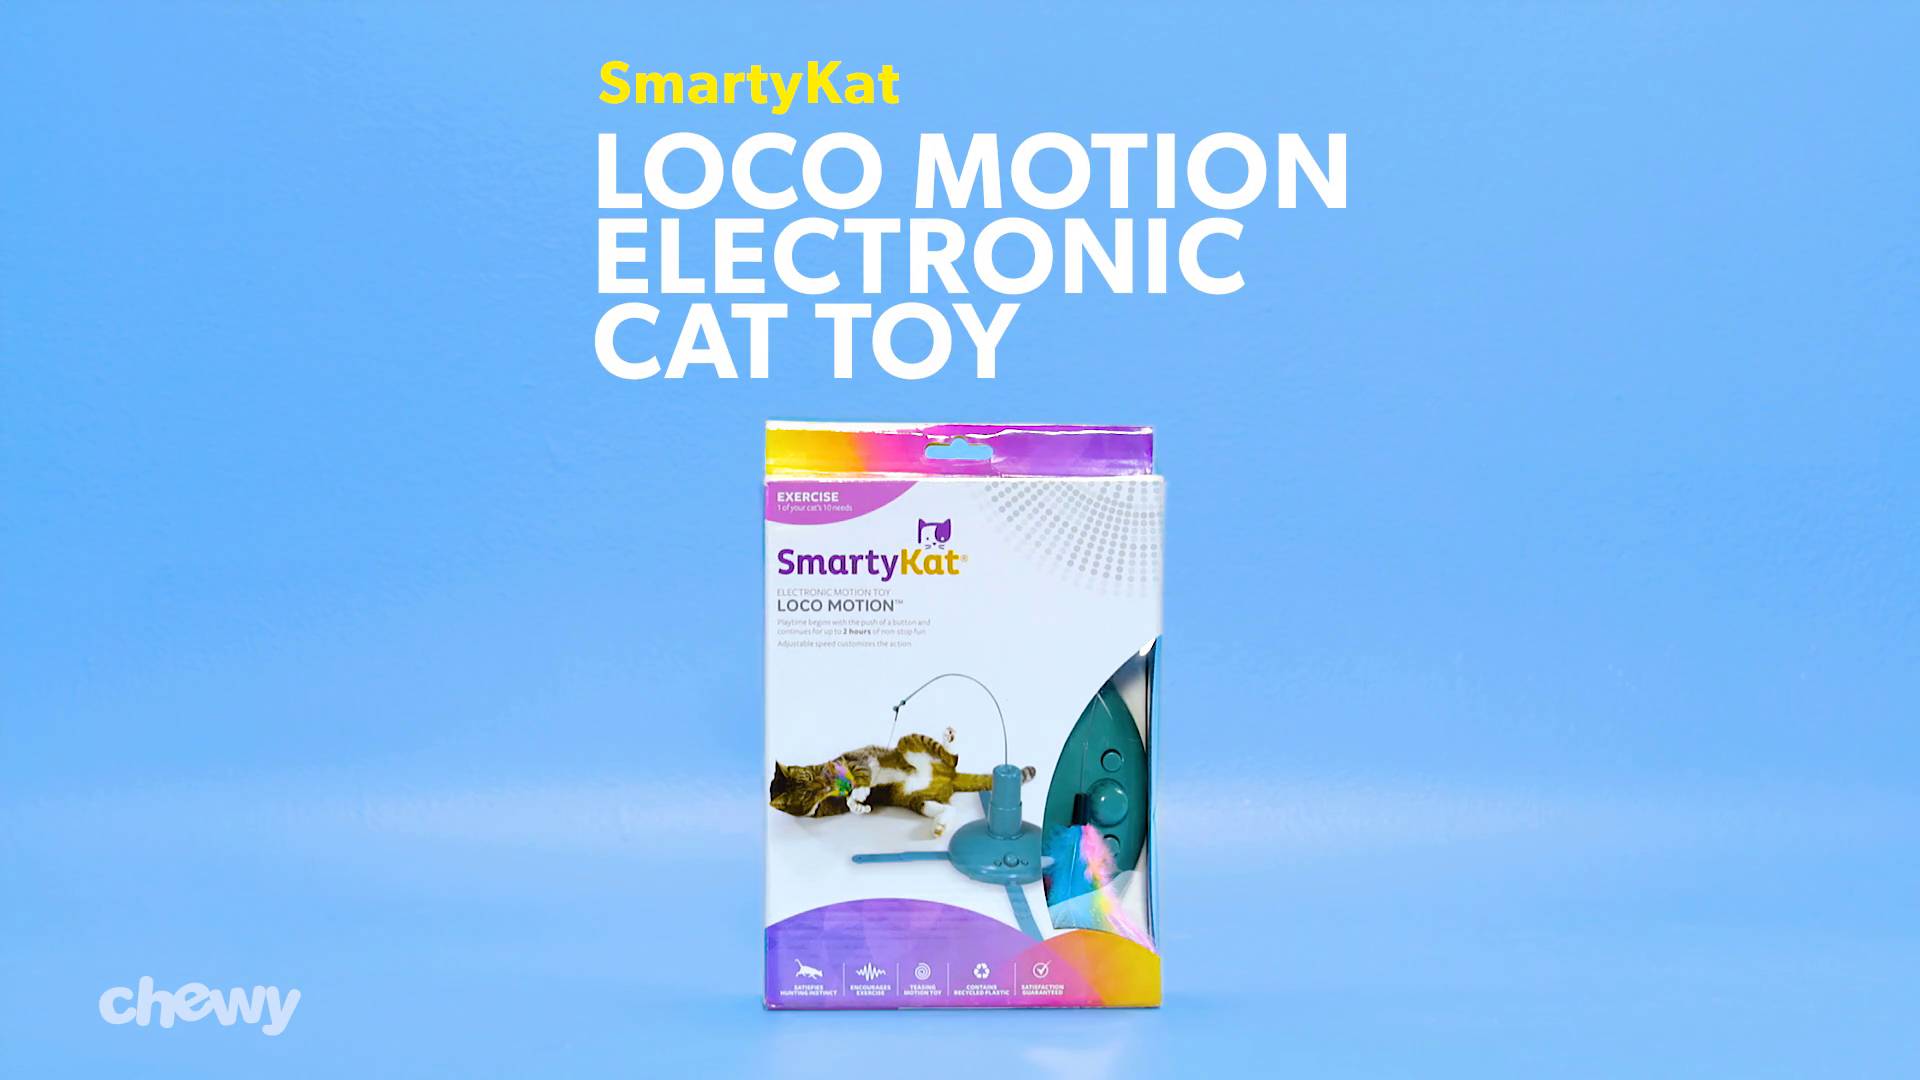 Battery Powered Loco Motion Adjustable Speed with Feathers Interactive Wand Electronic Motion Cat Toy New Version